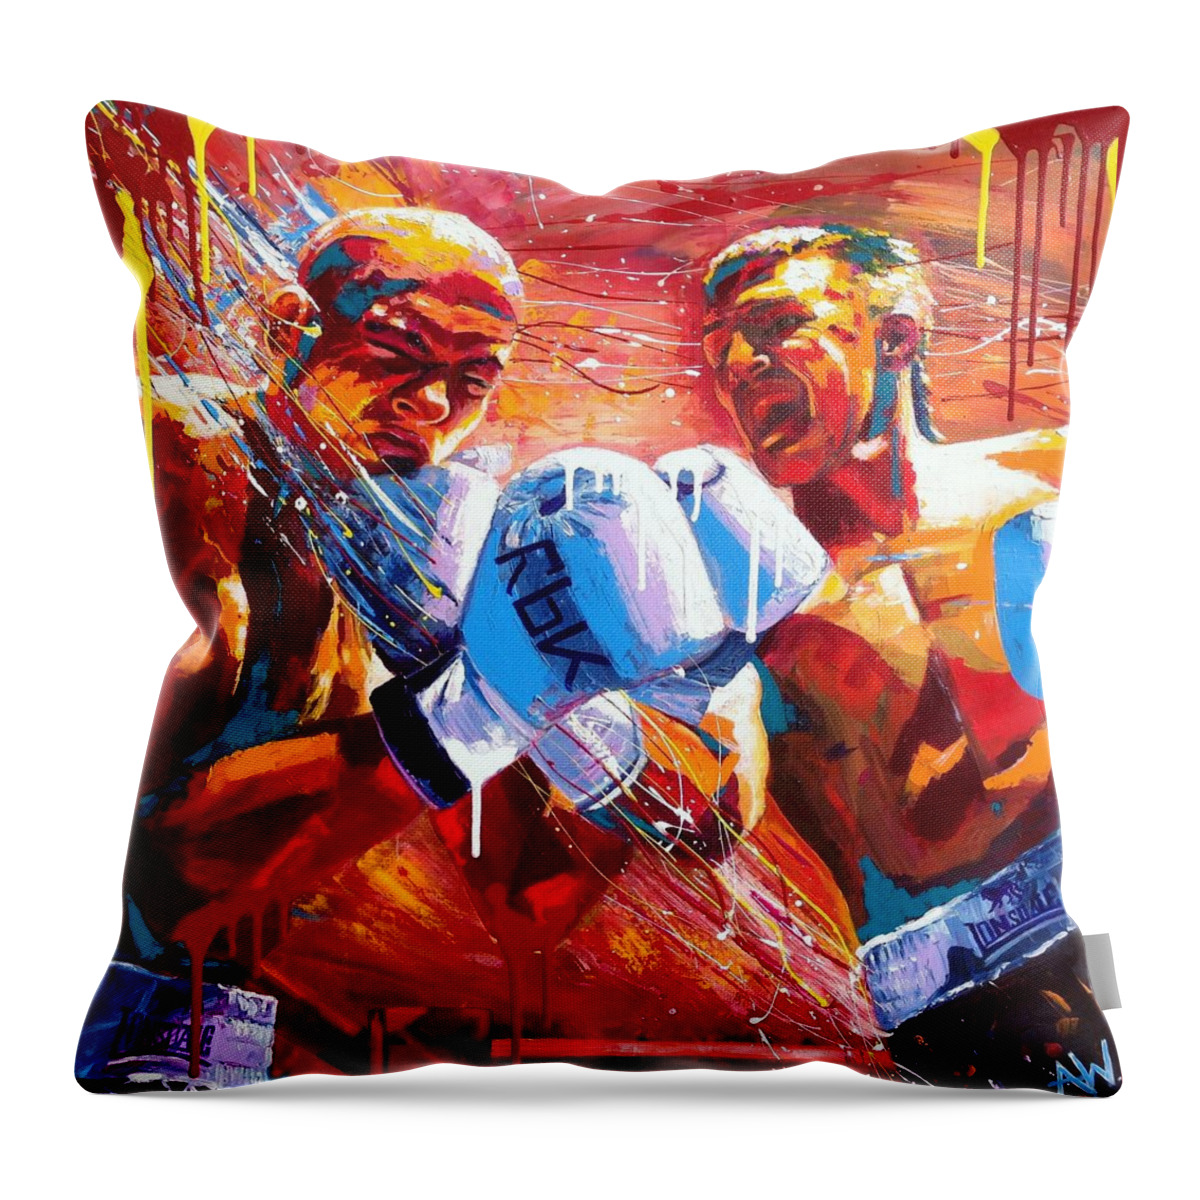 Art Throw Pillow featuring the painting Warriors by Angie Wright